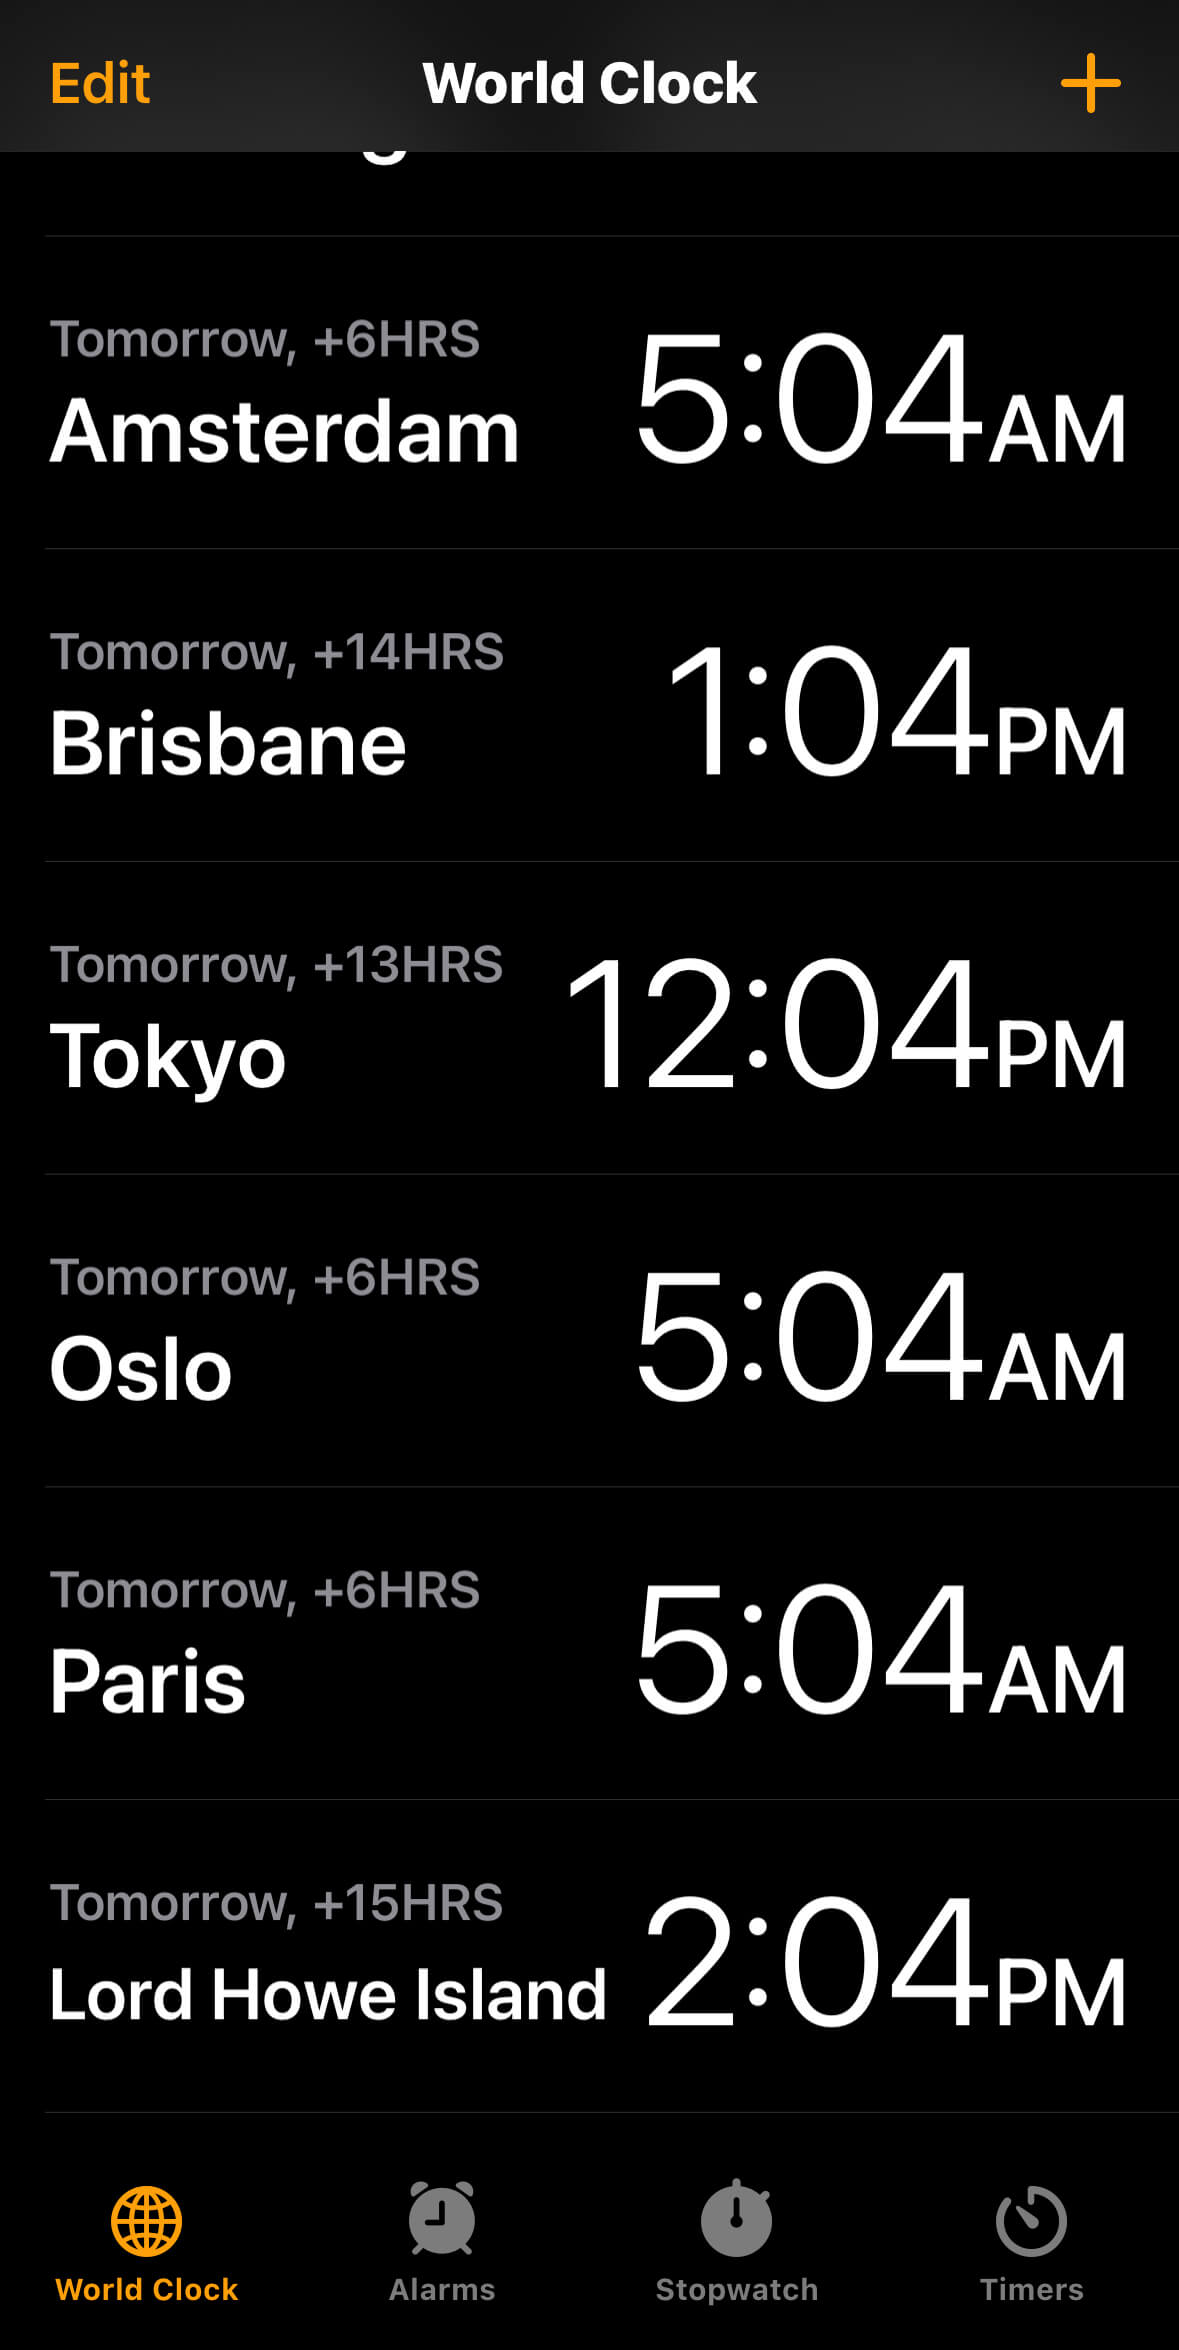 The World Clock tab of the iOS Clock app showing the time in several countries with digital clocks.